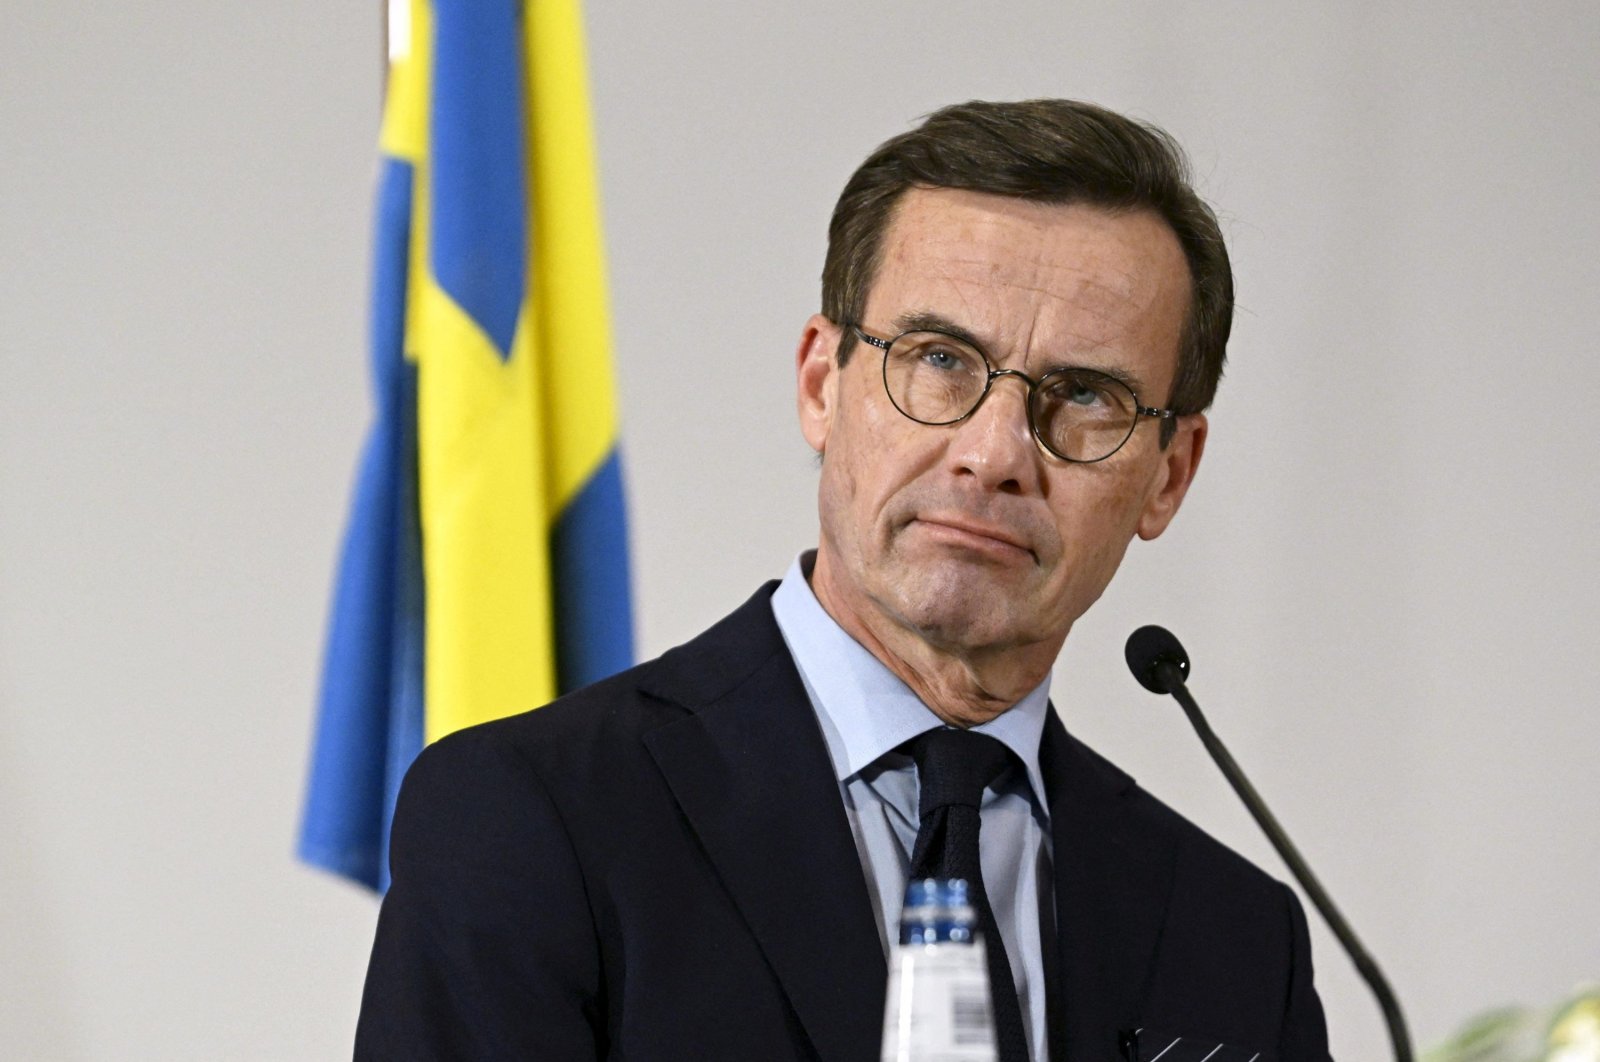 Sweden&#039;s Prime Minister Ulf Kristersson attends a press conference after the meeting of prime ministers and heads of government during the 74th Ordinary Session of the Nordic Council in Helsinki, Finland, Nov. 1, 2022. (AFP Photo)